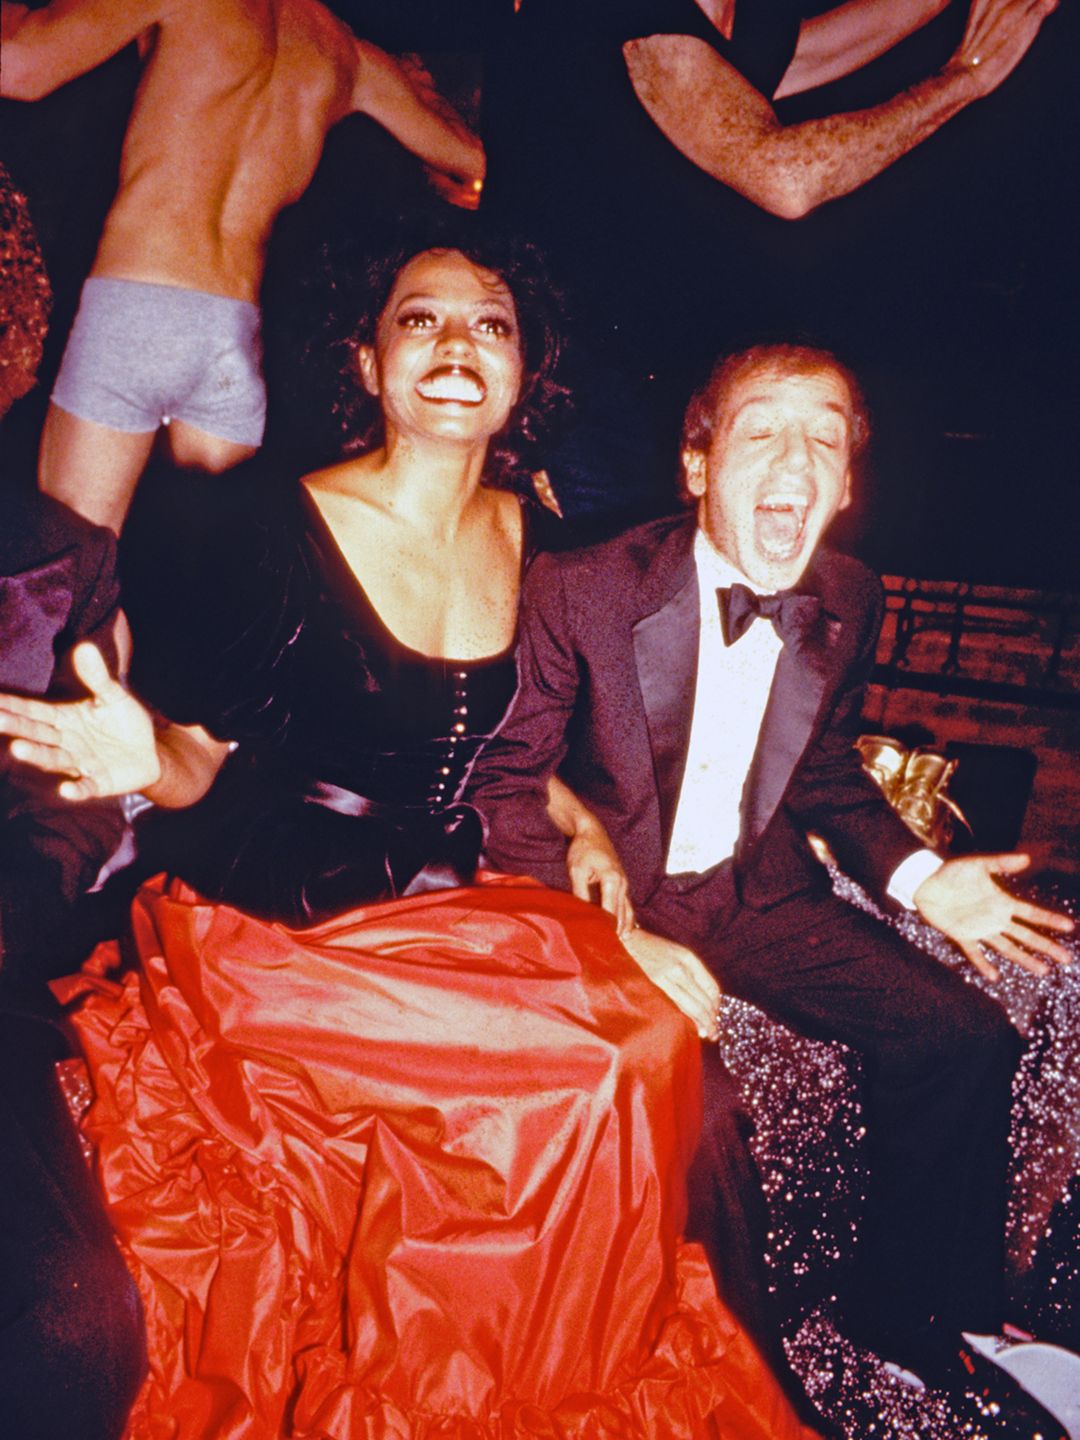 Diana Ross and club owner Steve Rubell, December 31, 1978.